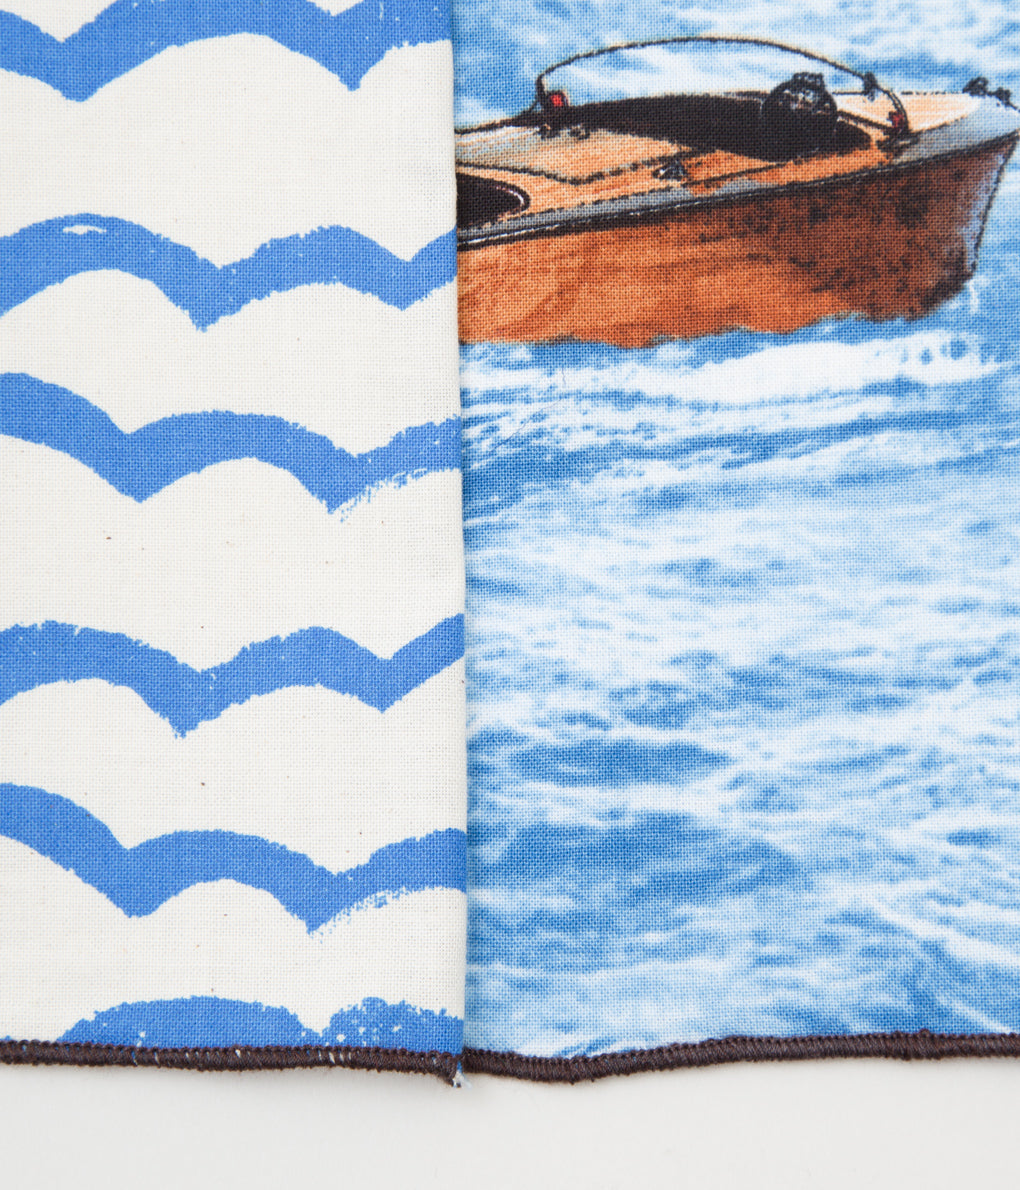 FINE AND DANDY "POCKET SQUARES"(BOATING PANELLED)